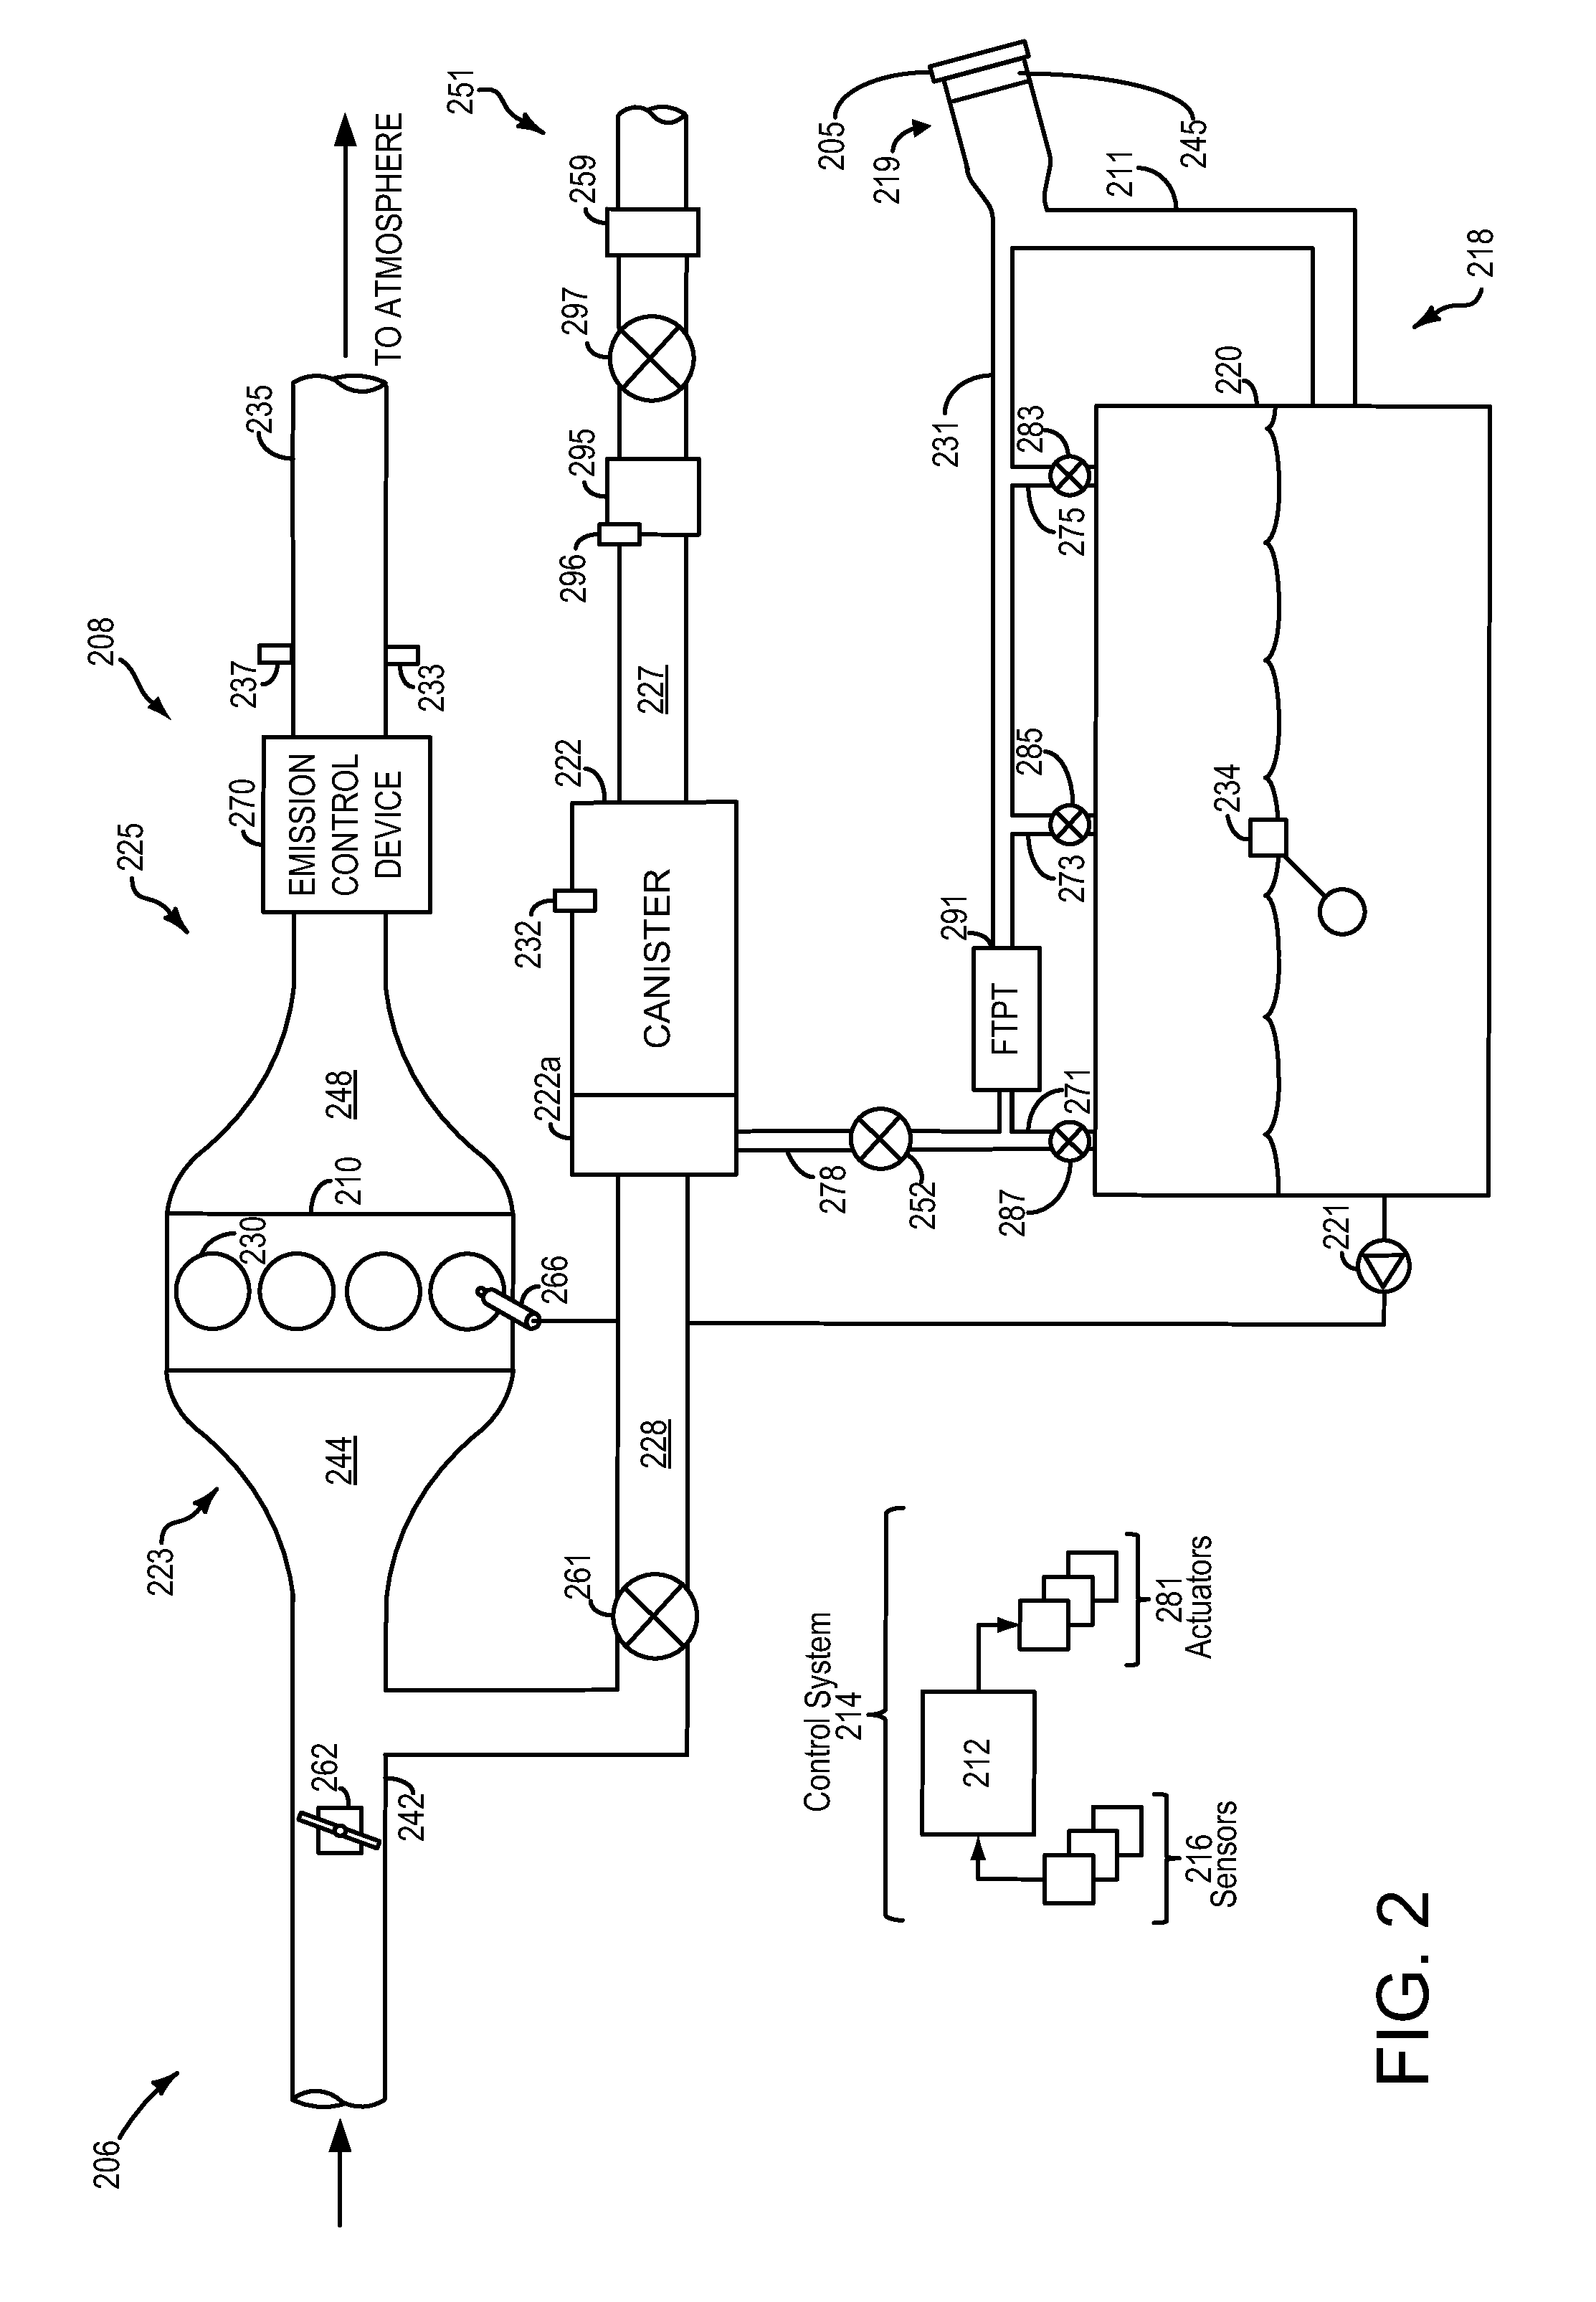 System and methods for determining fuel fill level